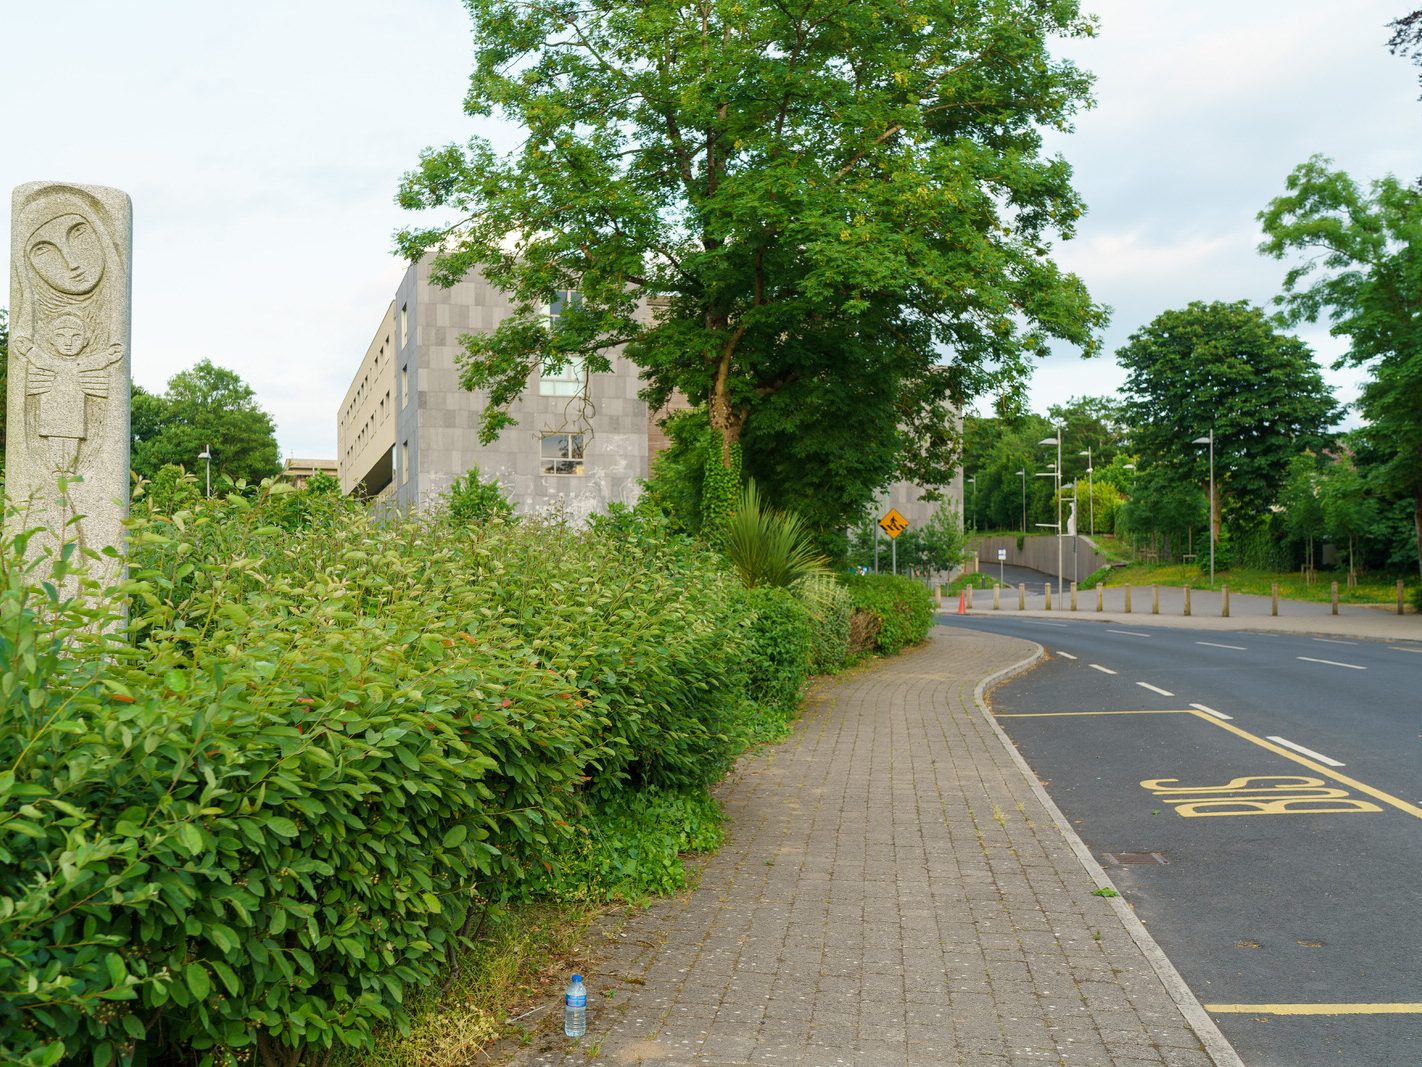 MARY IMMACULATE COLLEGE IN LIMERICK CITY [ALSO KNOWN AS MIC OR MARY I]-227634-1